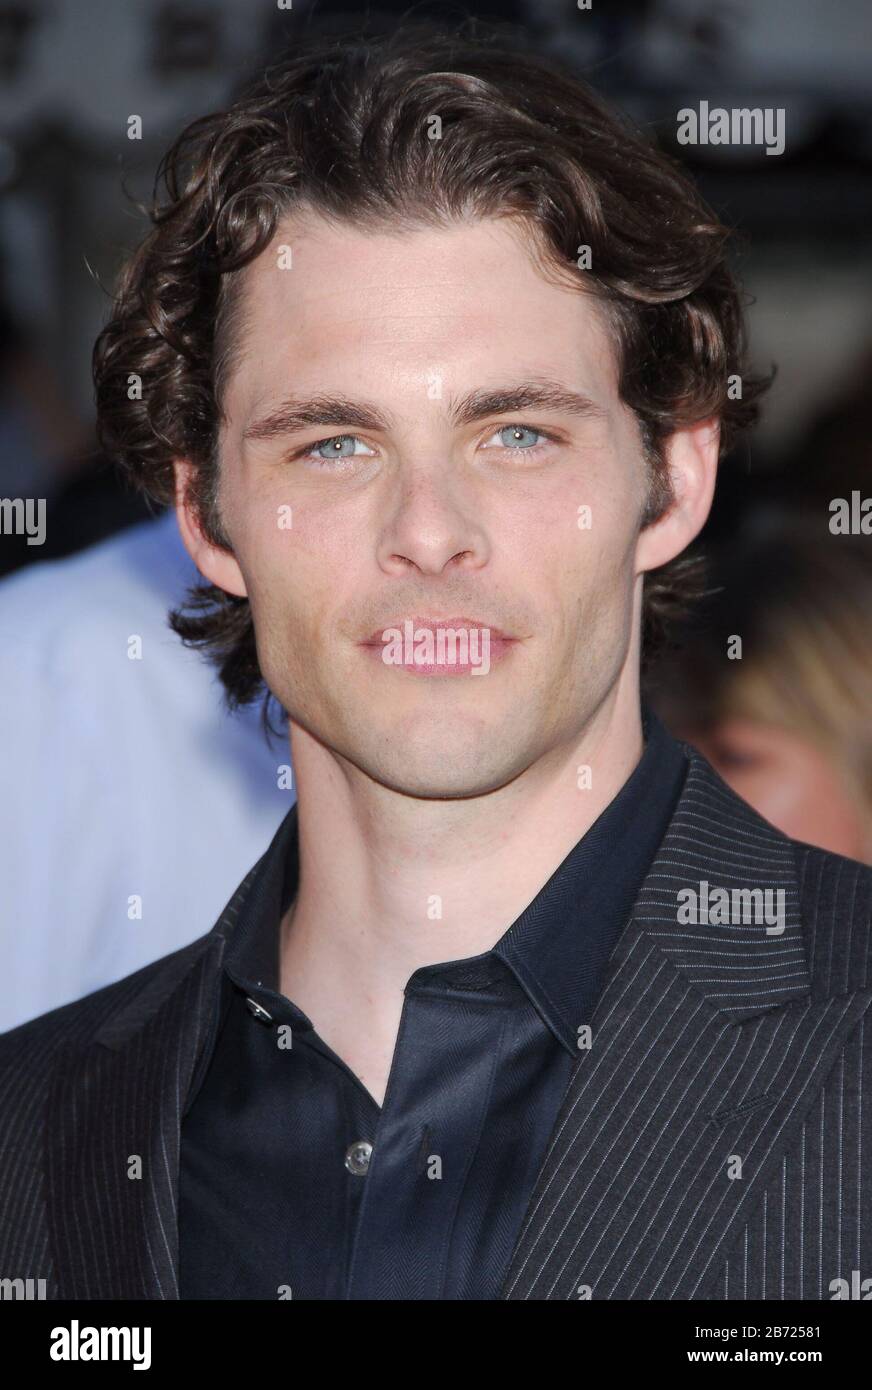 James Marsden at the World Premiere of 'Superman Returns' held at the Mann Village Theater in Westwood, CA. The event took place on Wednesday, June 21, 2006. Photo by: SBM / PictureLux - All Rights Reserved - File Reference # 33984-3744SBMPLX Stock Photo